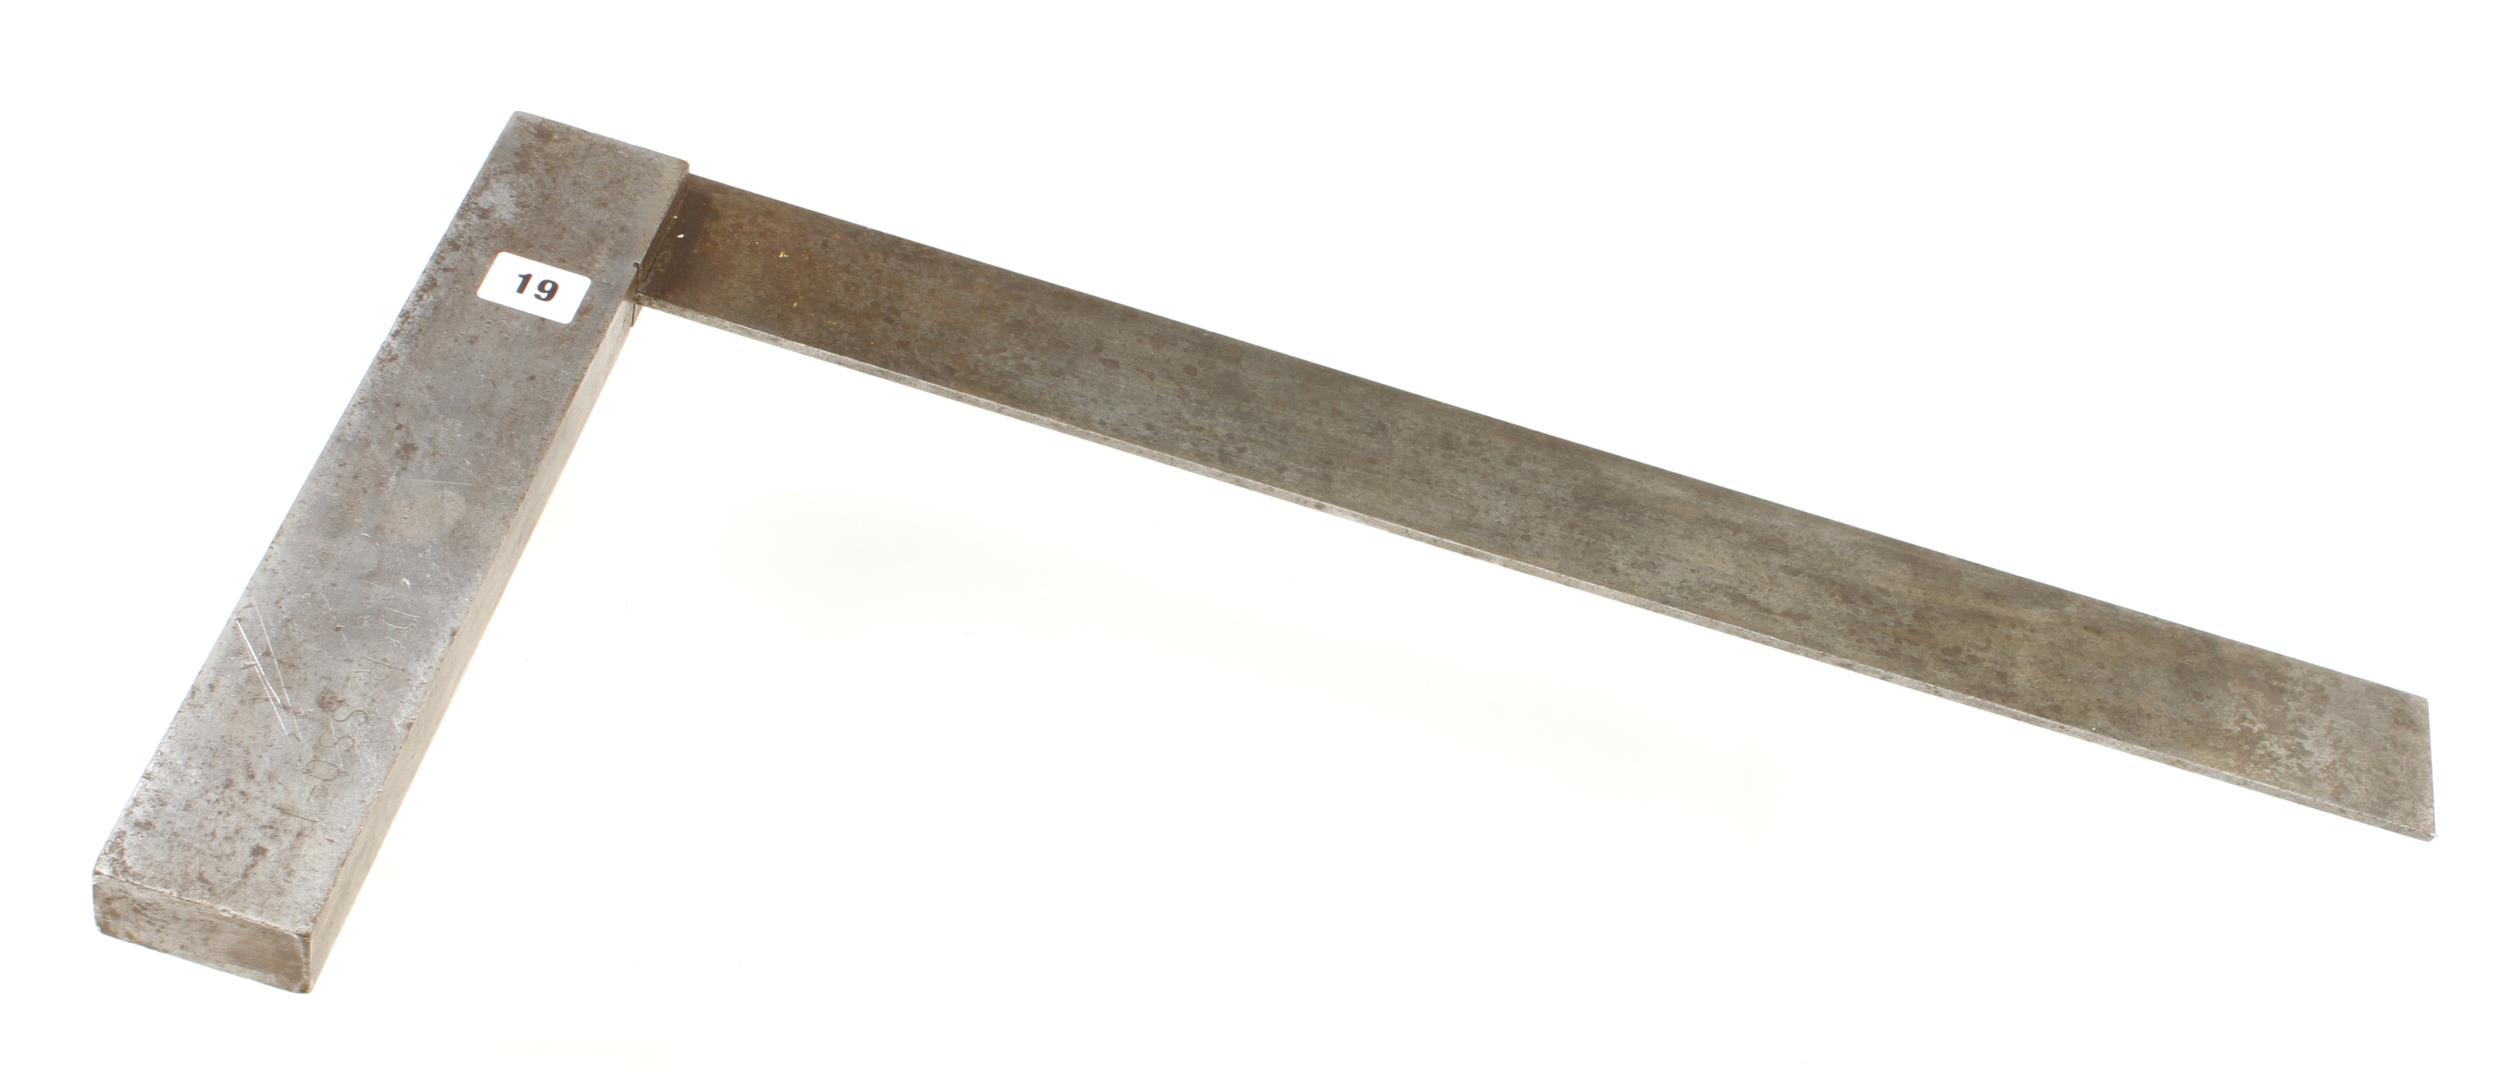 An engineer's steel square by MOORE & WRIGHT with 24" arm G+